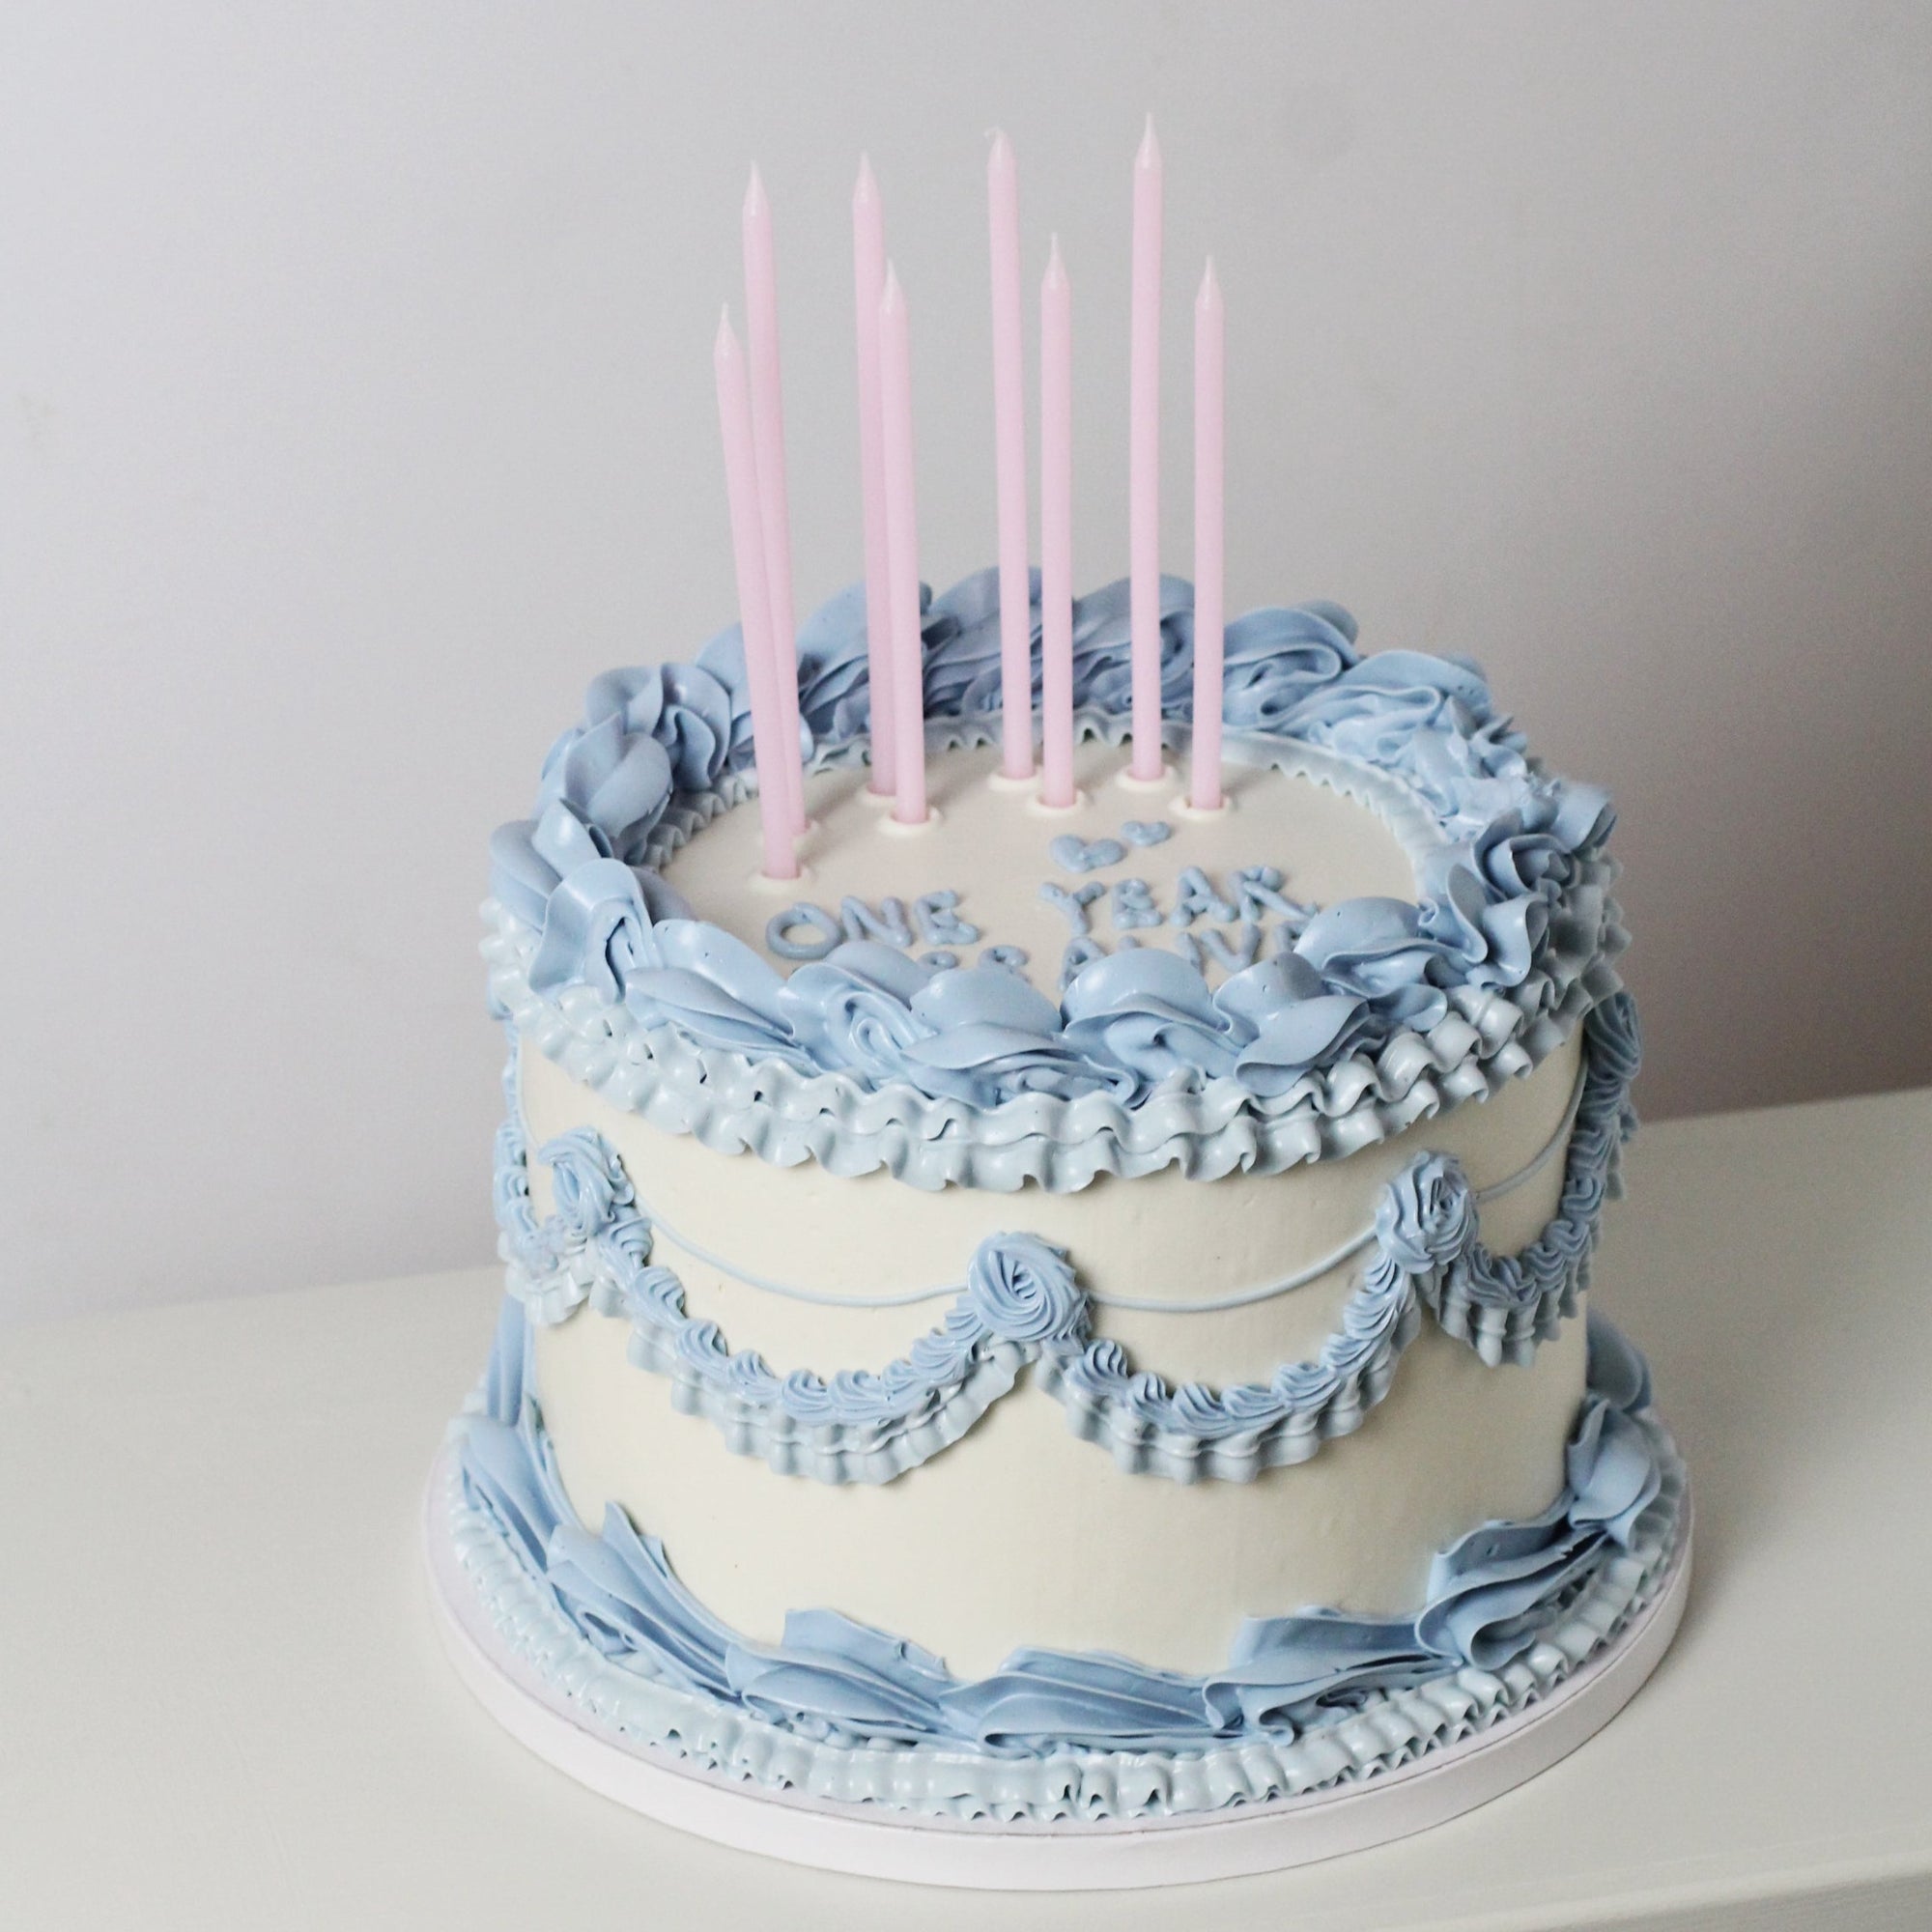 Vintage birthday cake with pink candles - Customize your frill colors